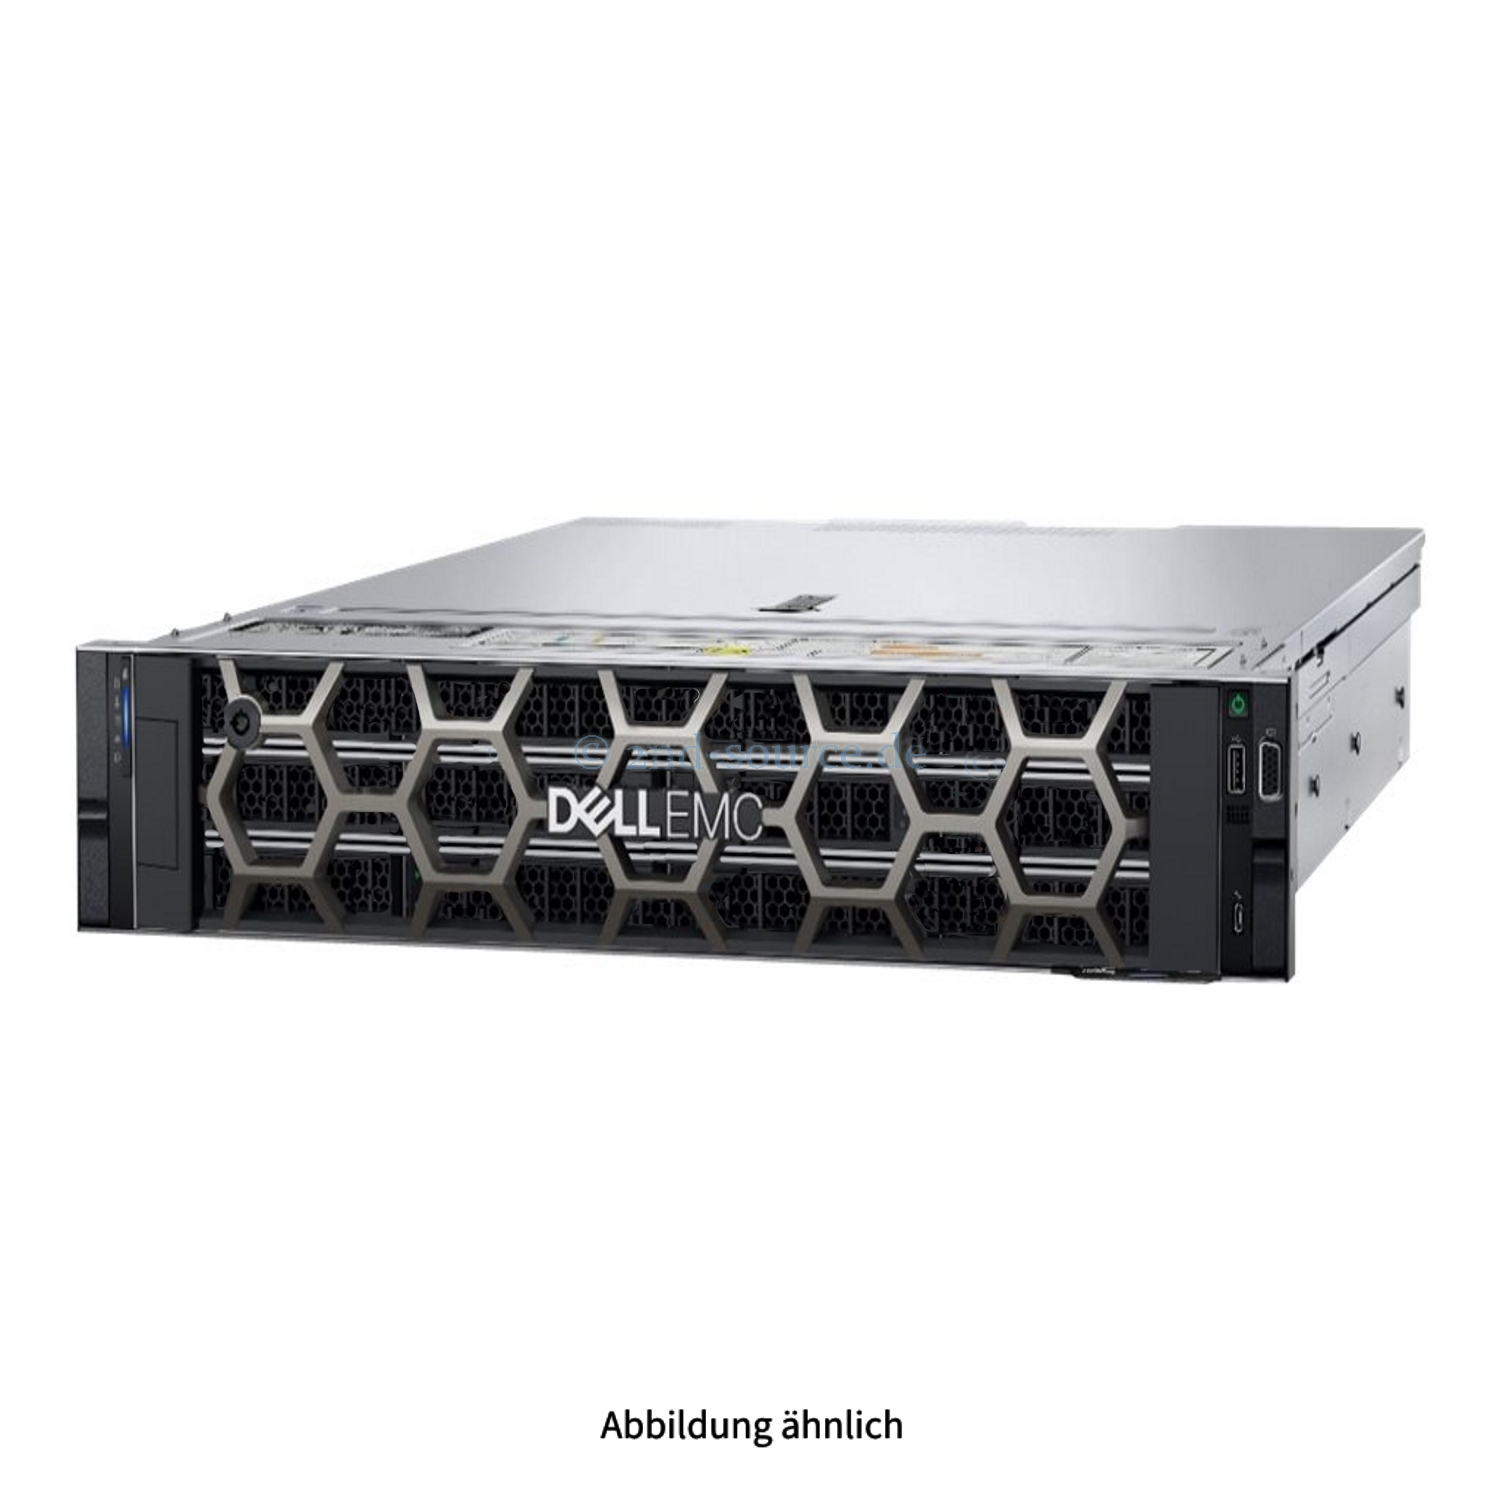 Dell R750xs 8xLFF 1P Silver 4314 2.40GHz 16C 32GB H755 480GB SATA 6G SSD BCM57412 1x 800W Rackkit Onsite Service After Remote Diagnosis bis 15 AUG. 2026  